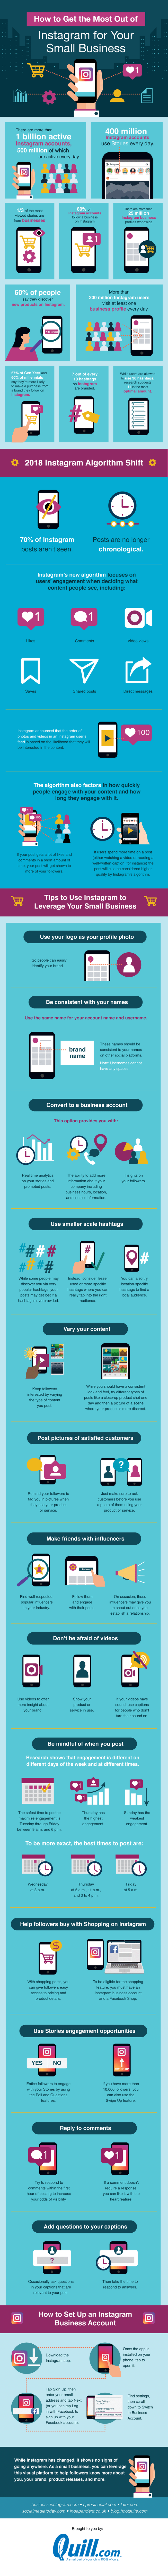 How to get the most out of Instagram for your small business #infographic